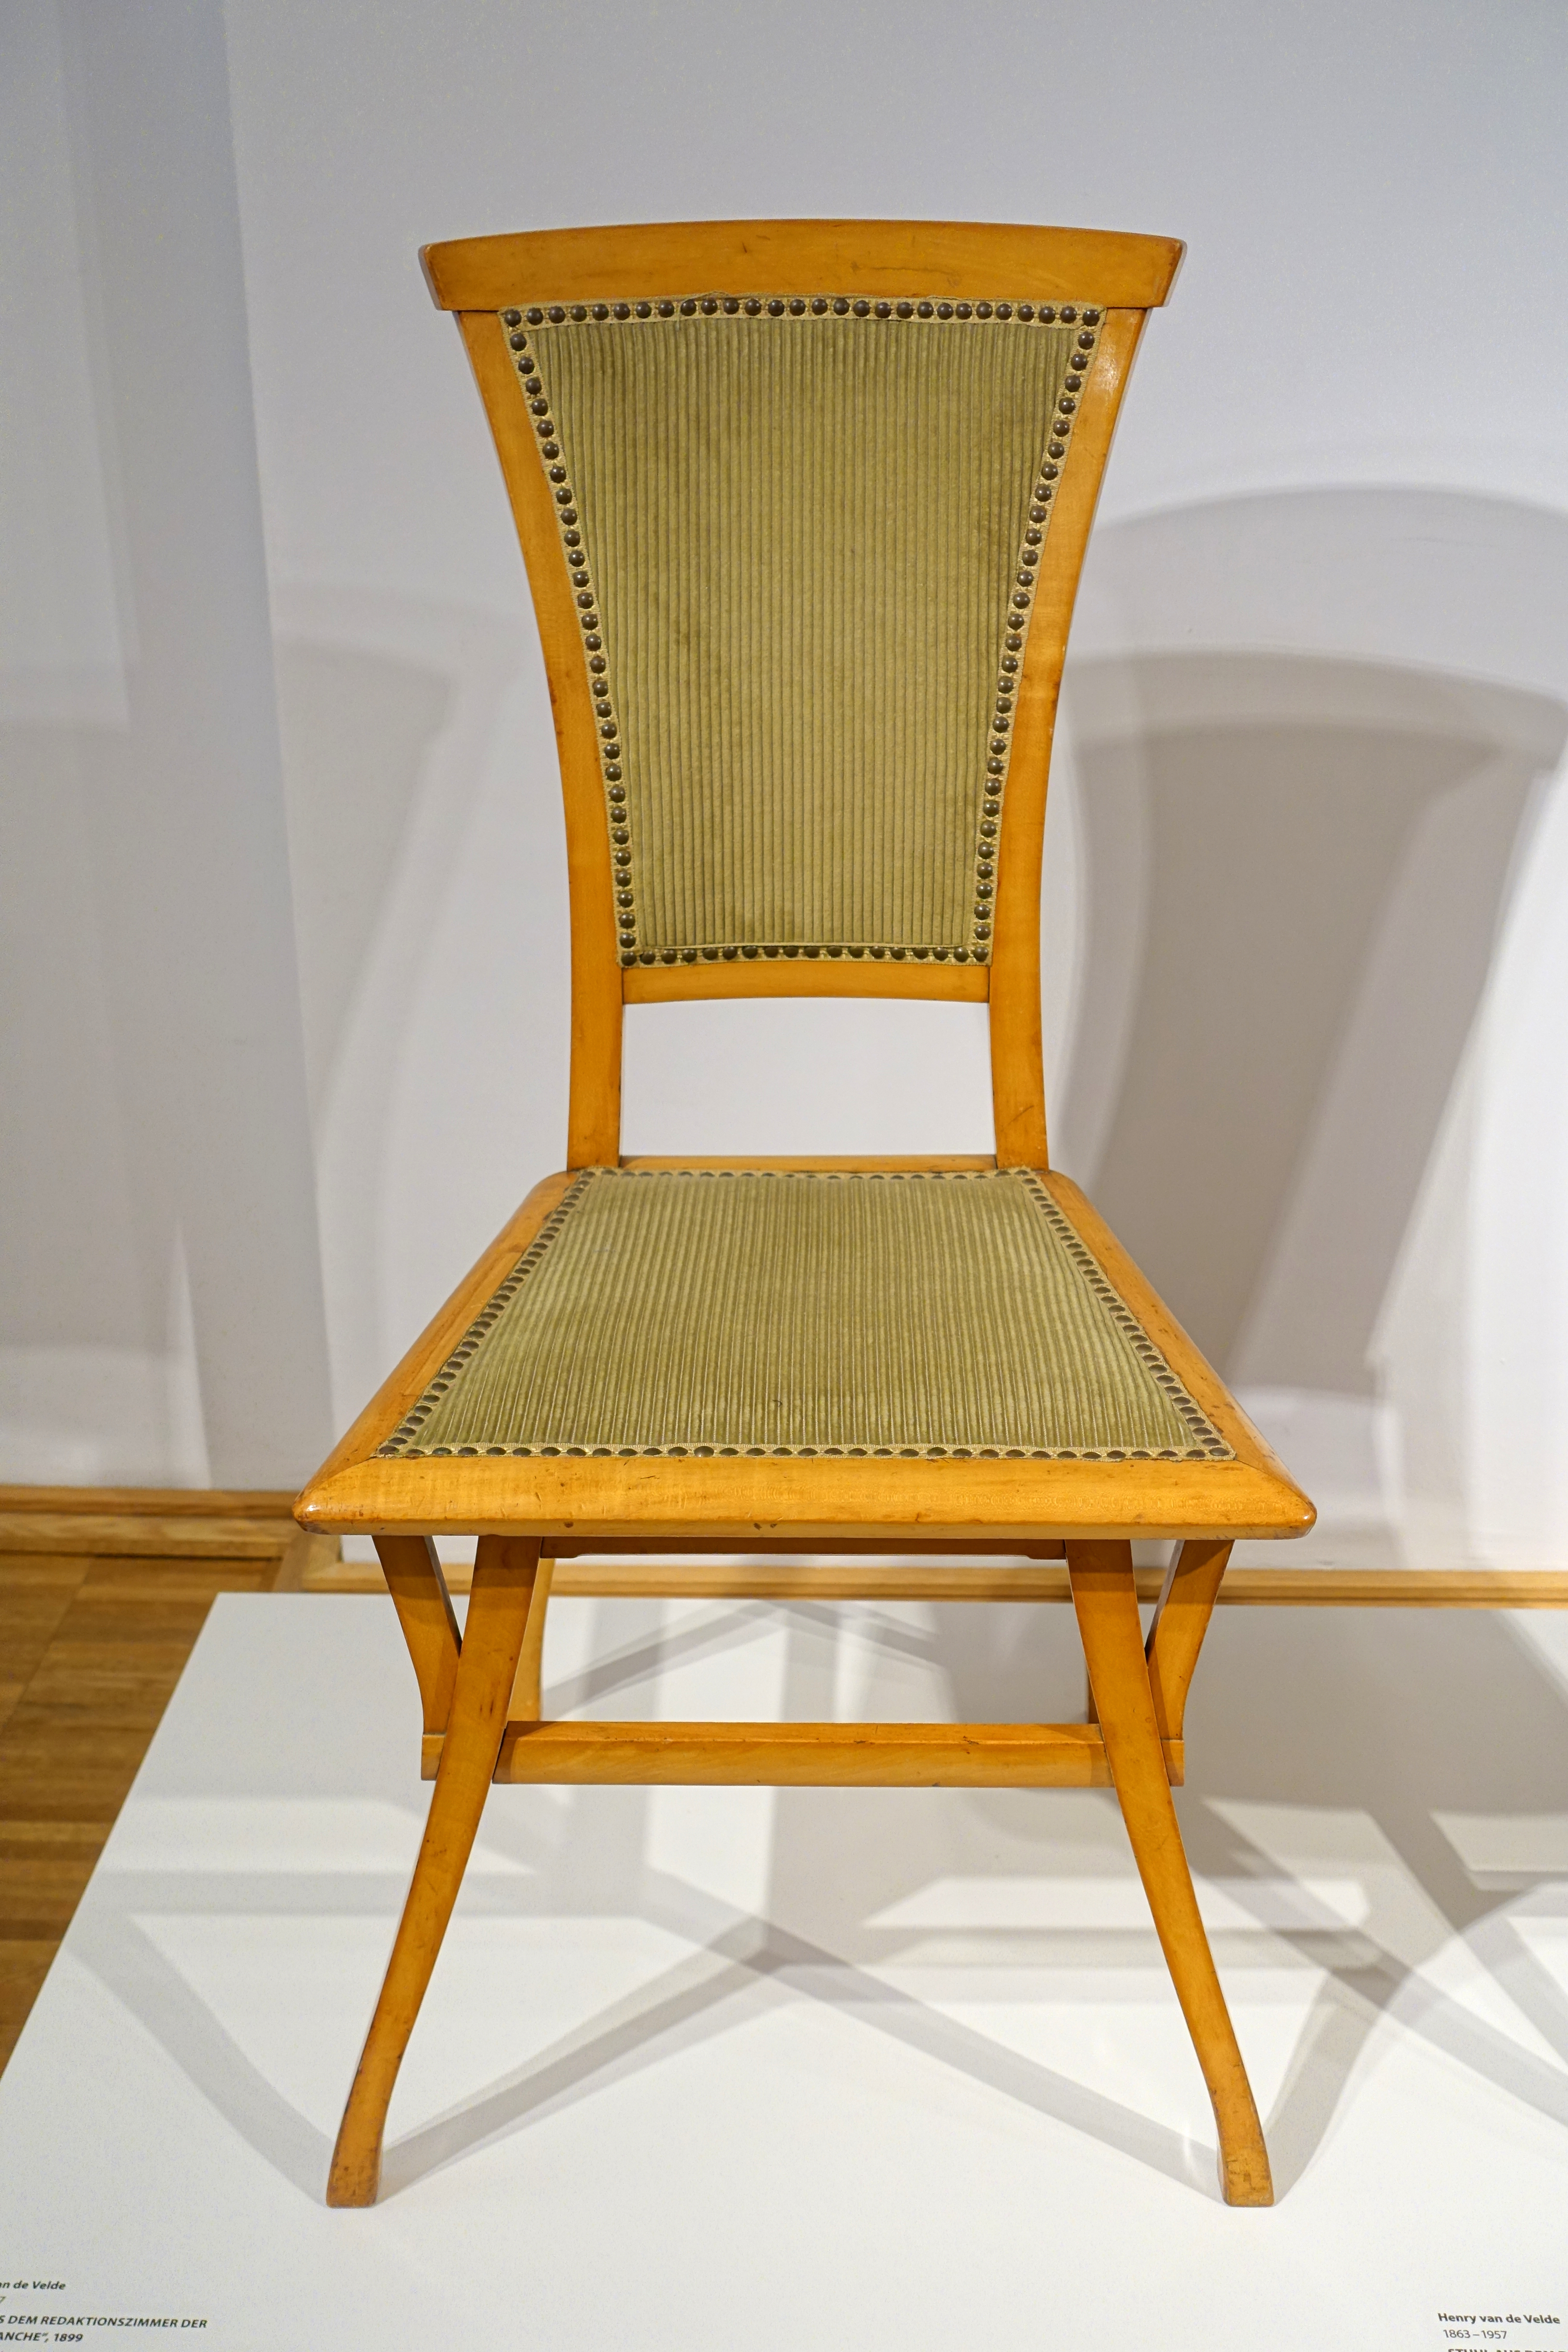 File:Chair from the editorial staff room of the Revue Blanche, by Henry van de Velde, 1899, maple, cotton - Hessisches Landesmuseum Darmstadt - Darmstadt, Germany - DSC00699.jpg